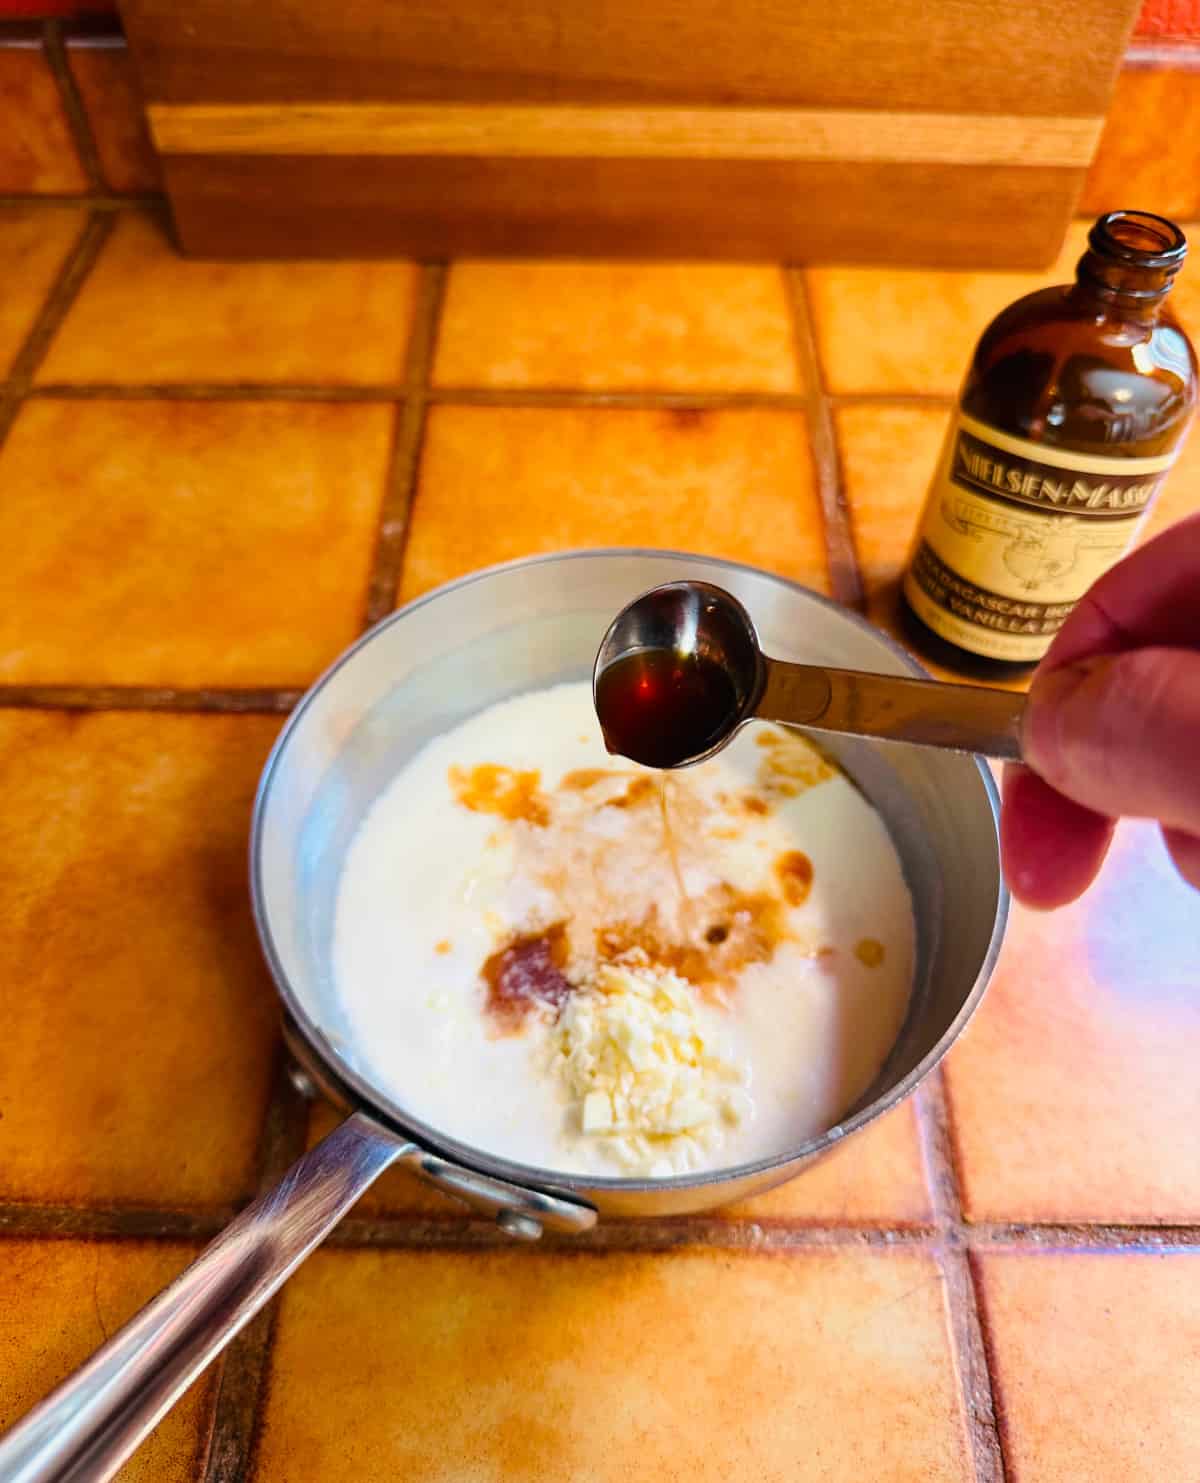 Vanilla extract being poured from a teaspoon into a small steel saucepan with half & half and white chocolate.